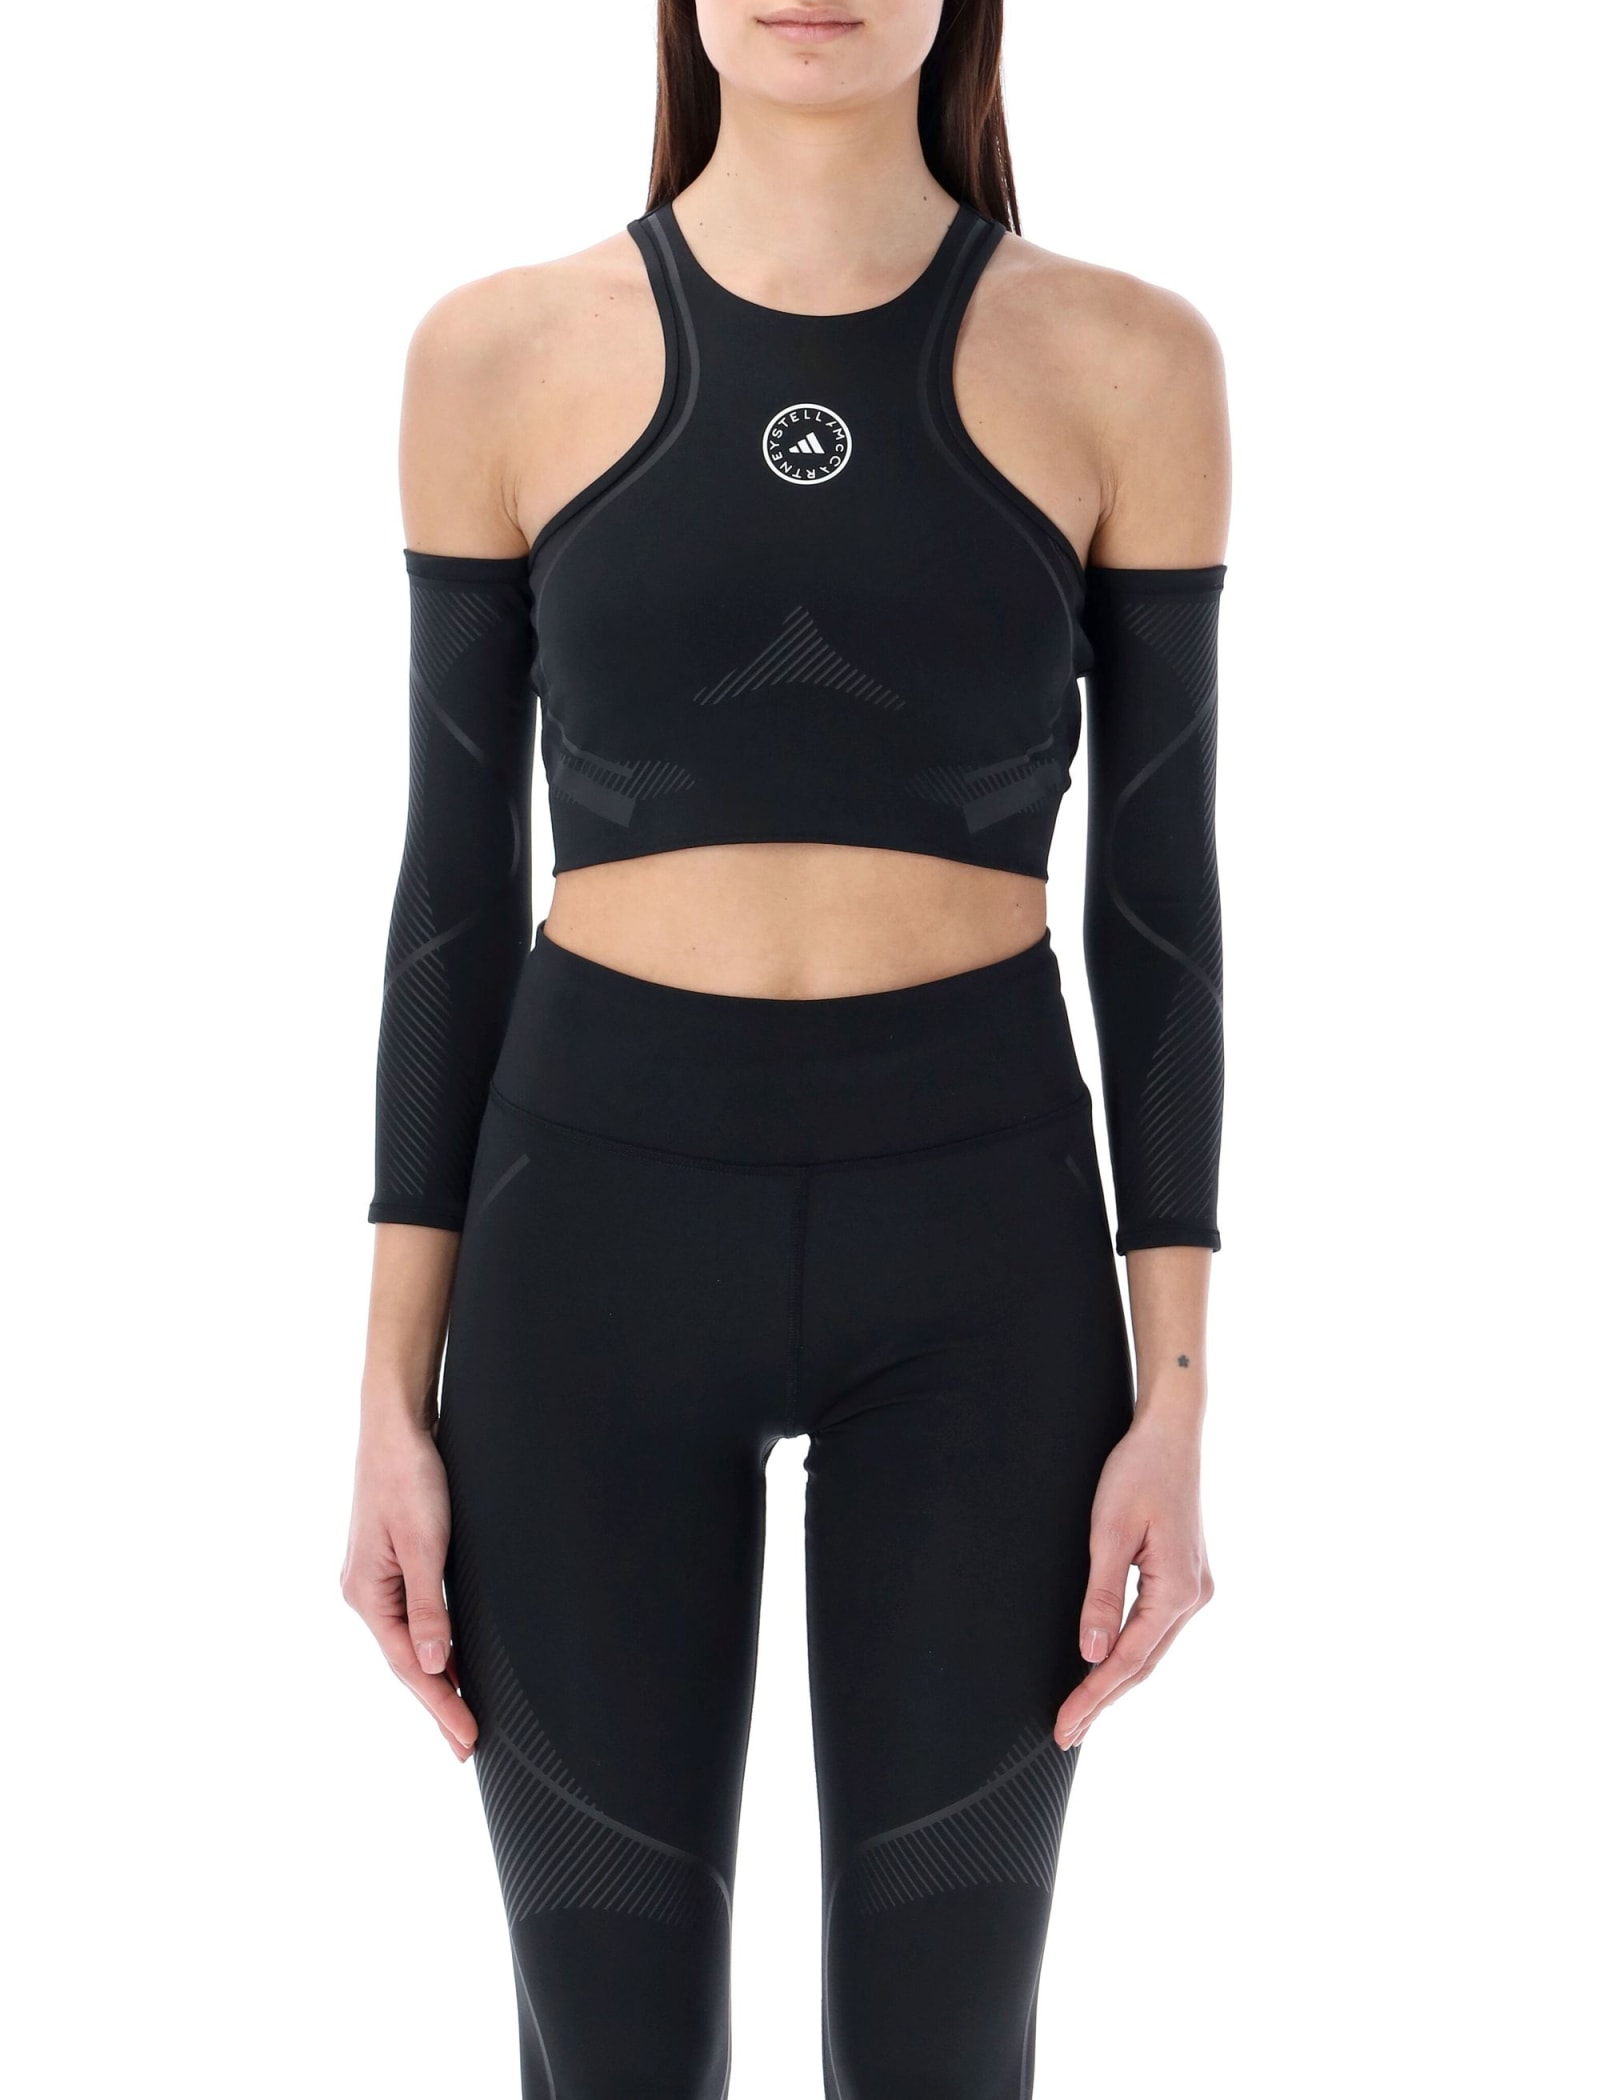 Shop Adidas By Stella Mccartney Truepace Running Crop Top With Arm Guards In Black